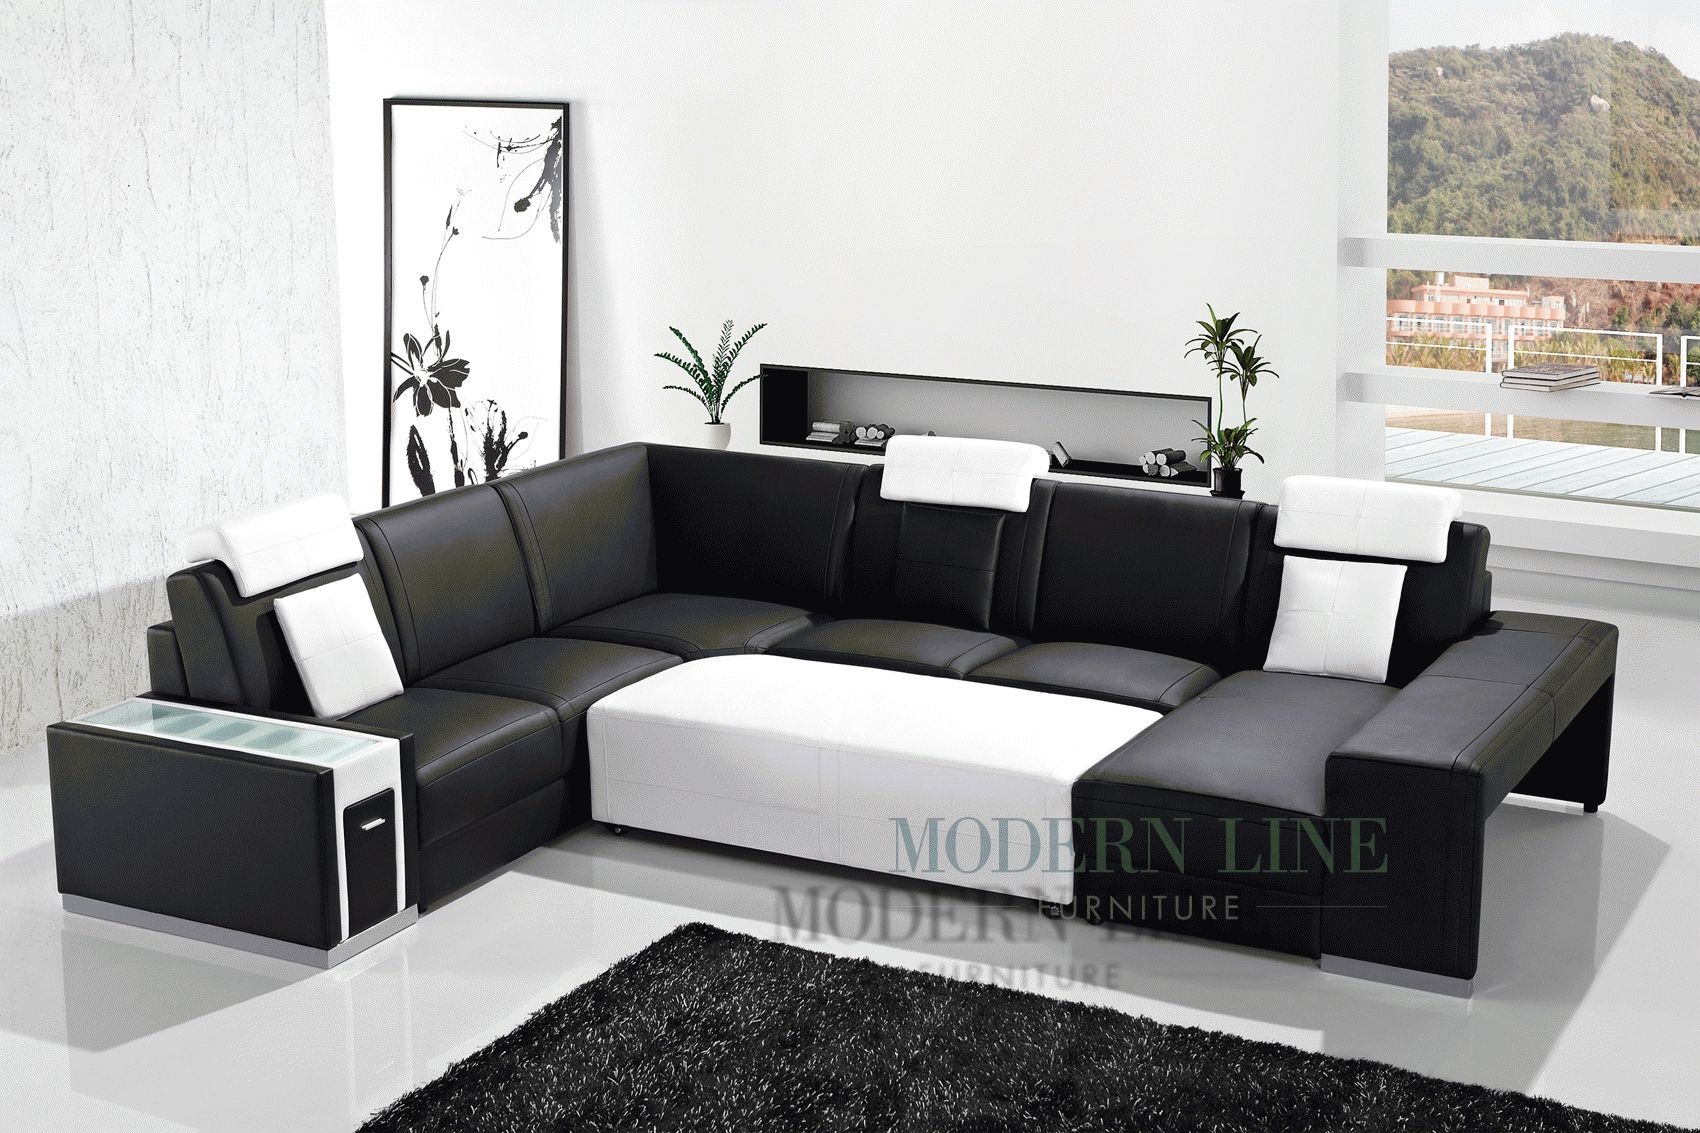 Large Sectional Sofa With Ottoman | Tehranmix Decoration With Regard To Sectional Sofa With Large Ottoman (View 6 of 30)